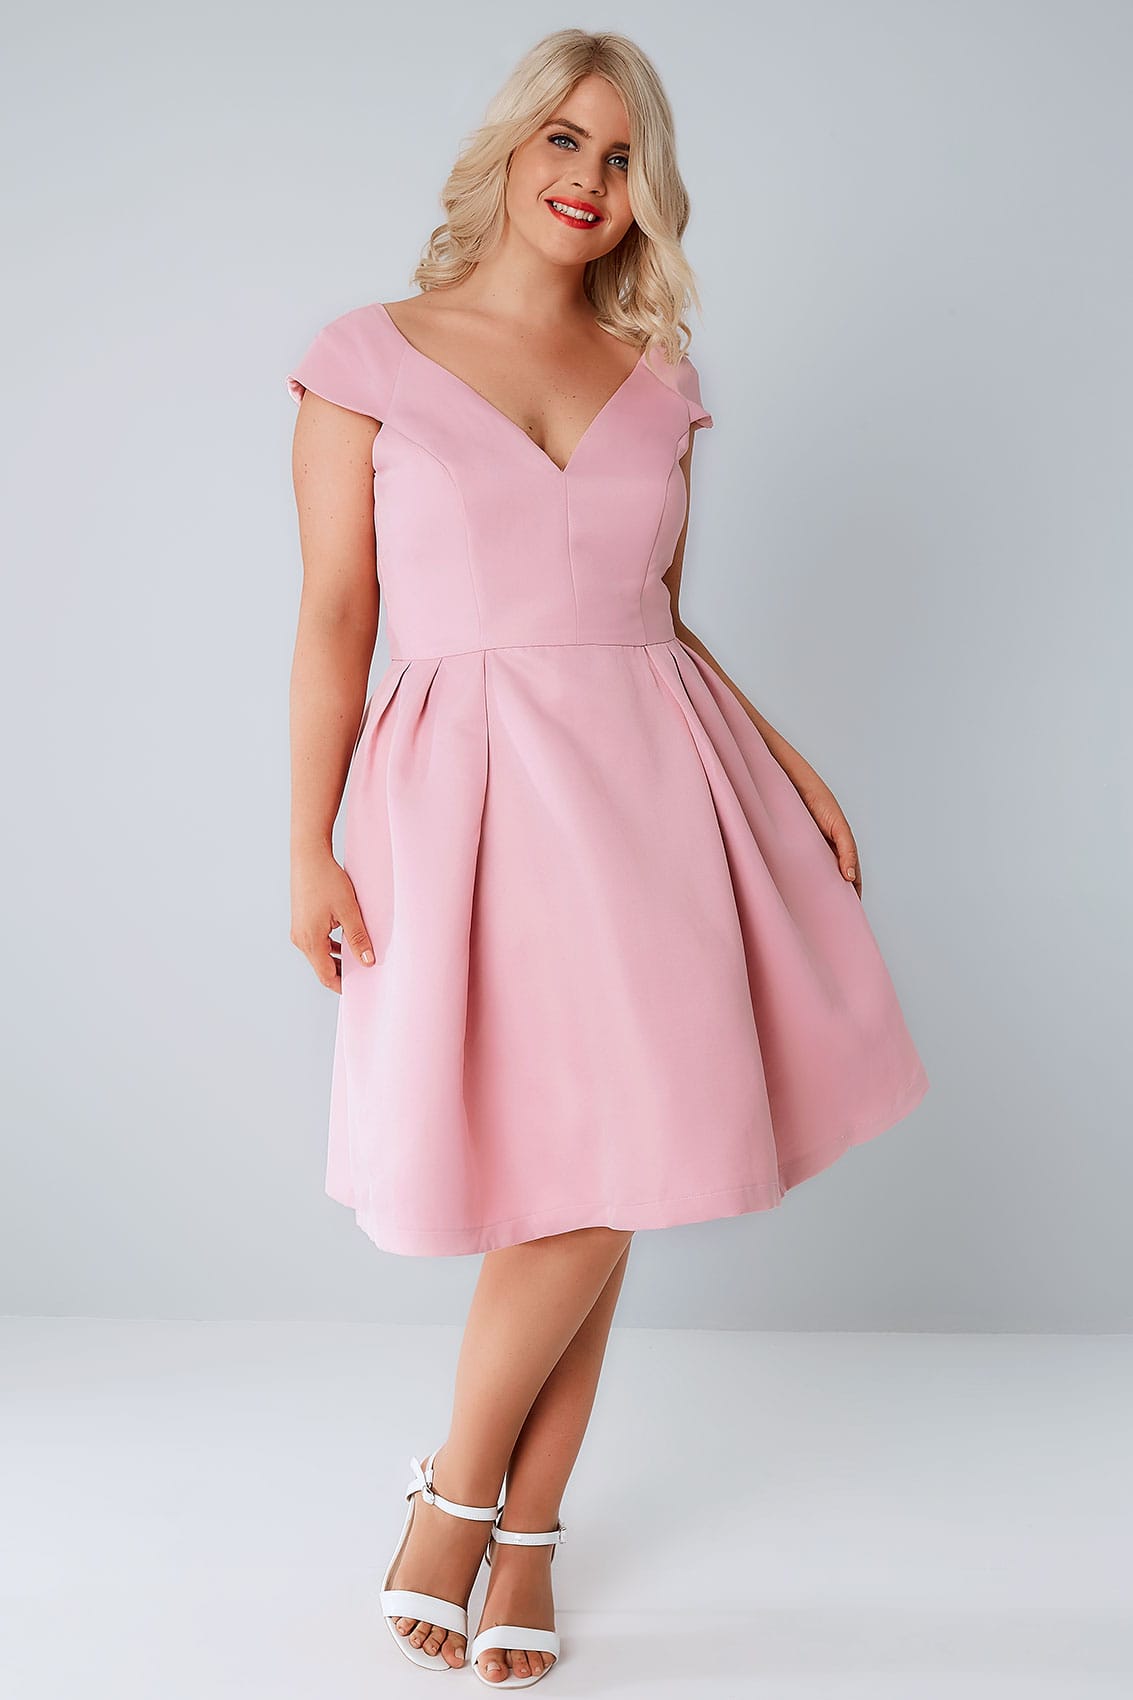  CHI  CHI  Pink  V Neck Prom  Dress  With Cap Sleeves Plus size 